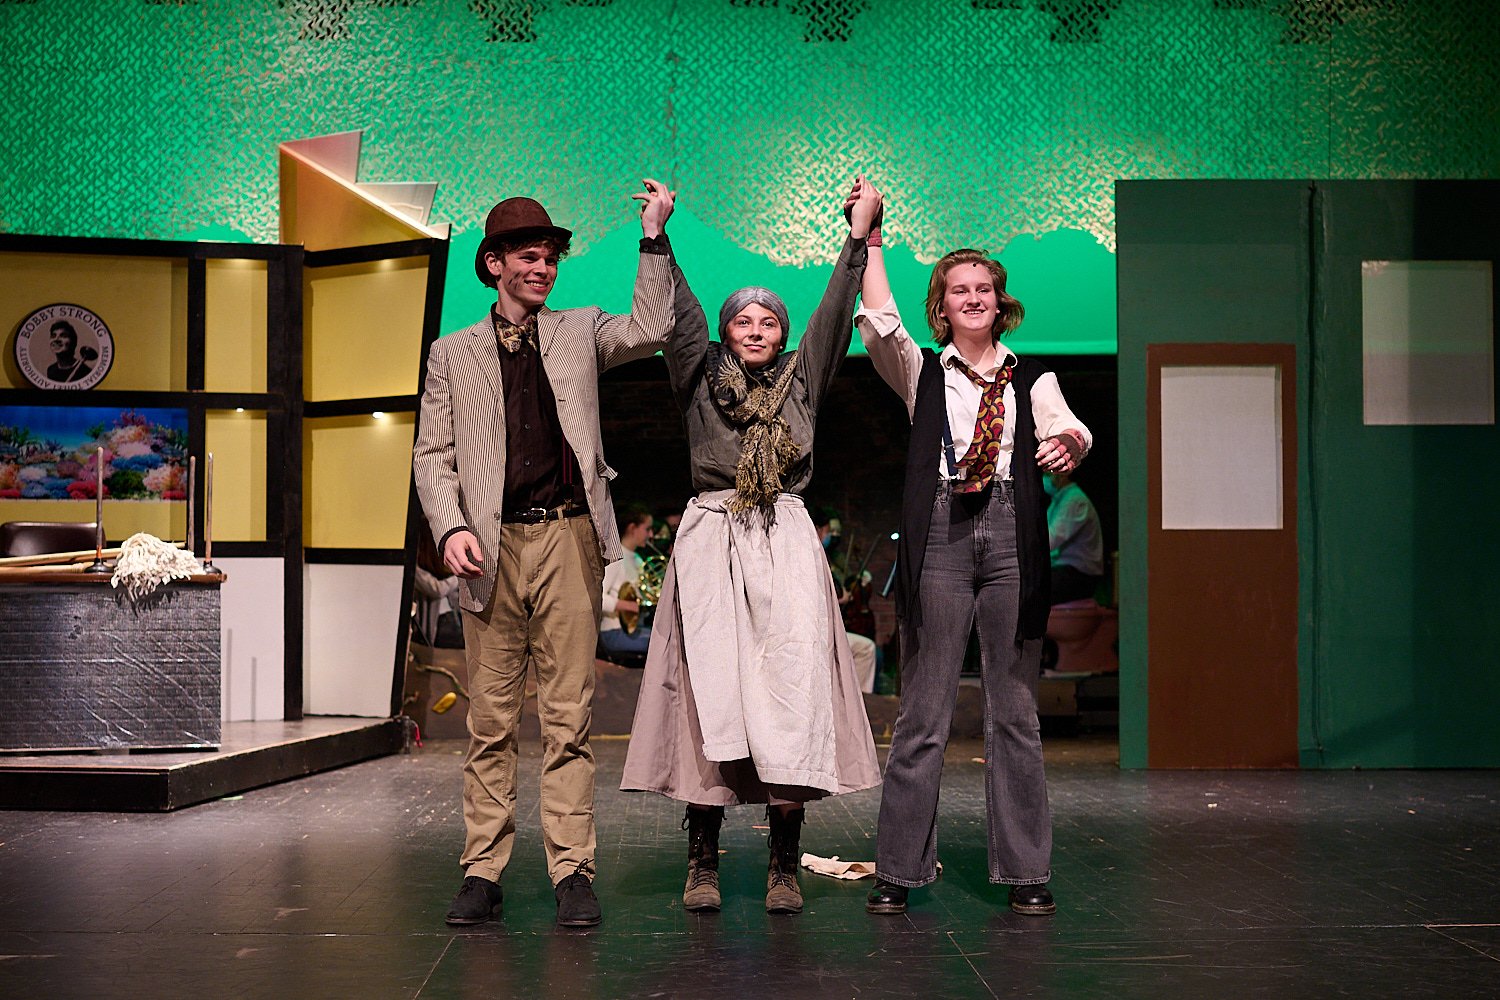  SEWICKLEY, PA, USA - MARCH 2ND 2022: High School students of Sewickley Academy are performing in an annual musical show “Urinetown” running on March 3rd-5th 2022. Brooke Menzock 